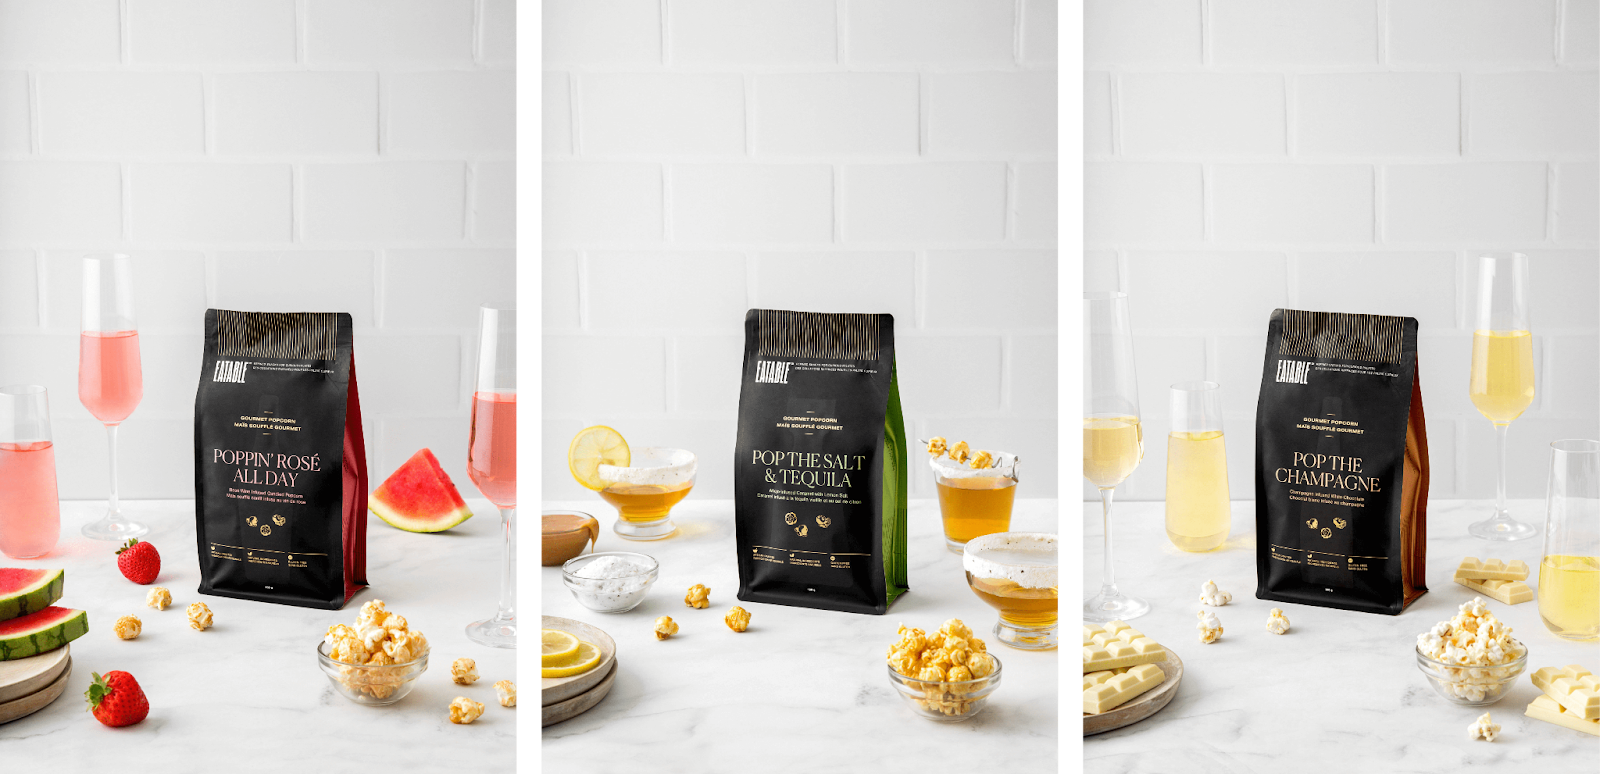 Smile ABCs EATABLE Popcorn–The image shows 3 separate product photos of different flavors. The first is the “Poppin’ Rosé All Day” blend, with champagne glasses of rose beside the bag, along with popcorn kernels, strawberries, and watermelon slices. The second is the “Pop the Salt and Tequila” blend with salt-rimmed glasses of tequila beside the bad, along with kernels, lemon slices, and a bowl of salt. The final is the “Pop The Champagne” blend with glasses of champagne surrounding the bag, along with popcorn kernels, and white chocolate.